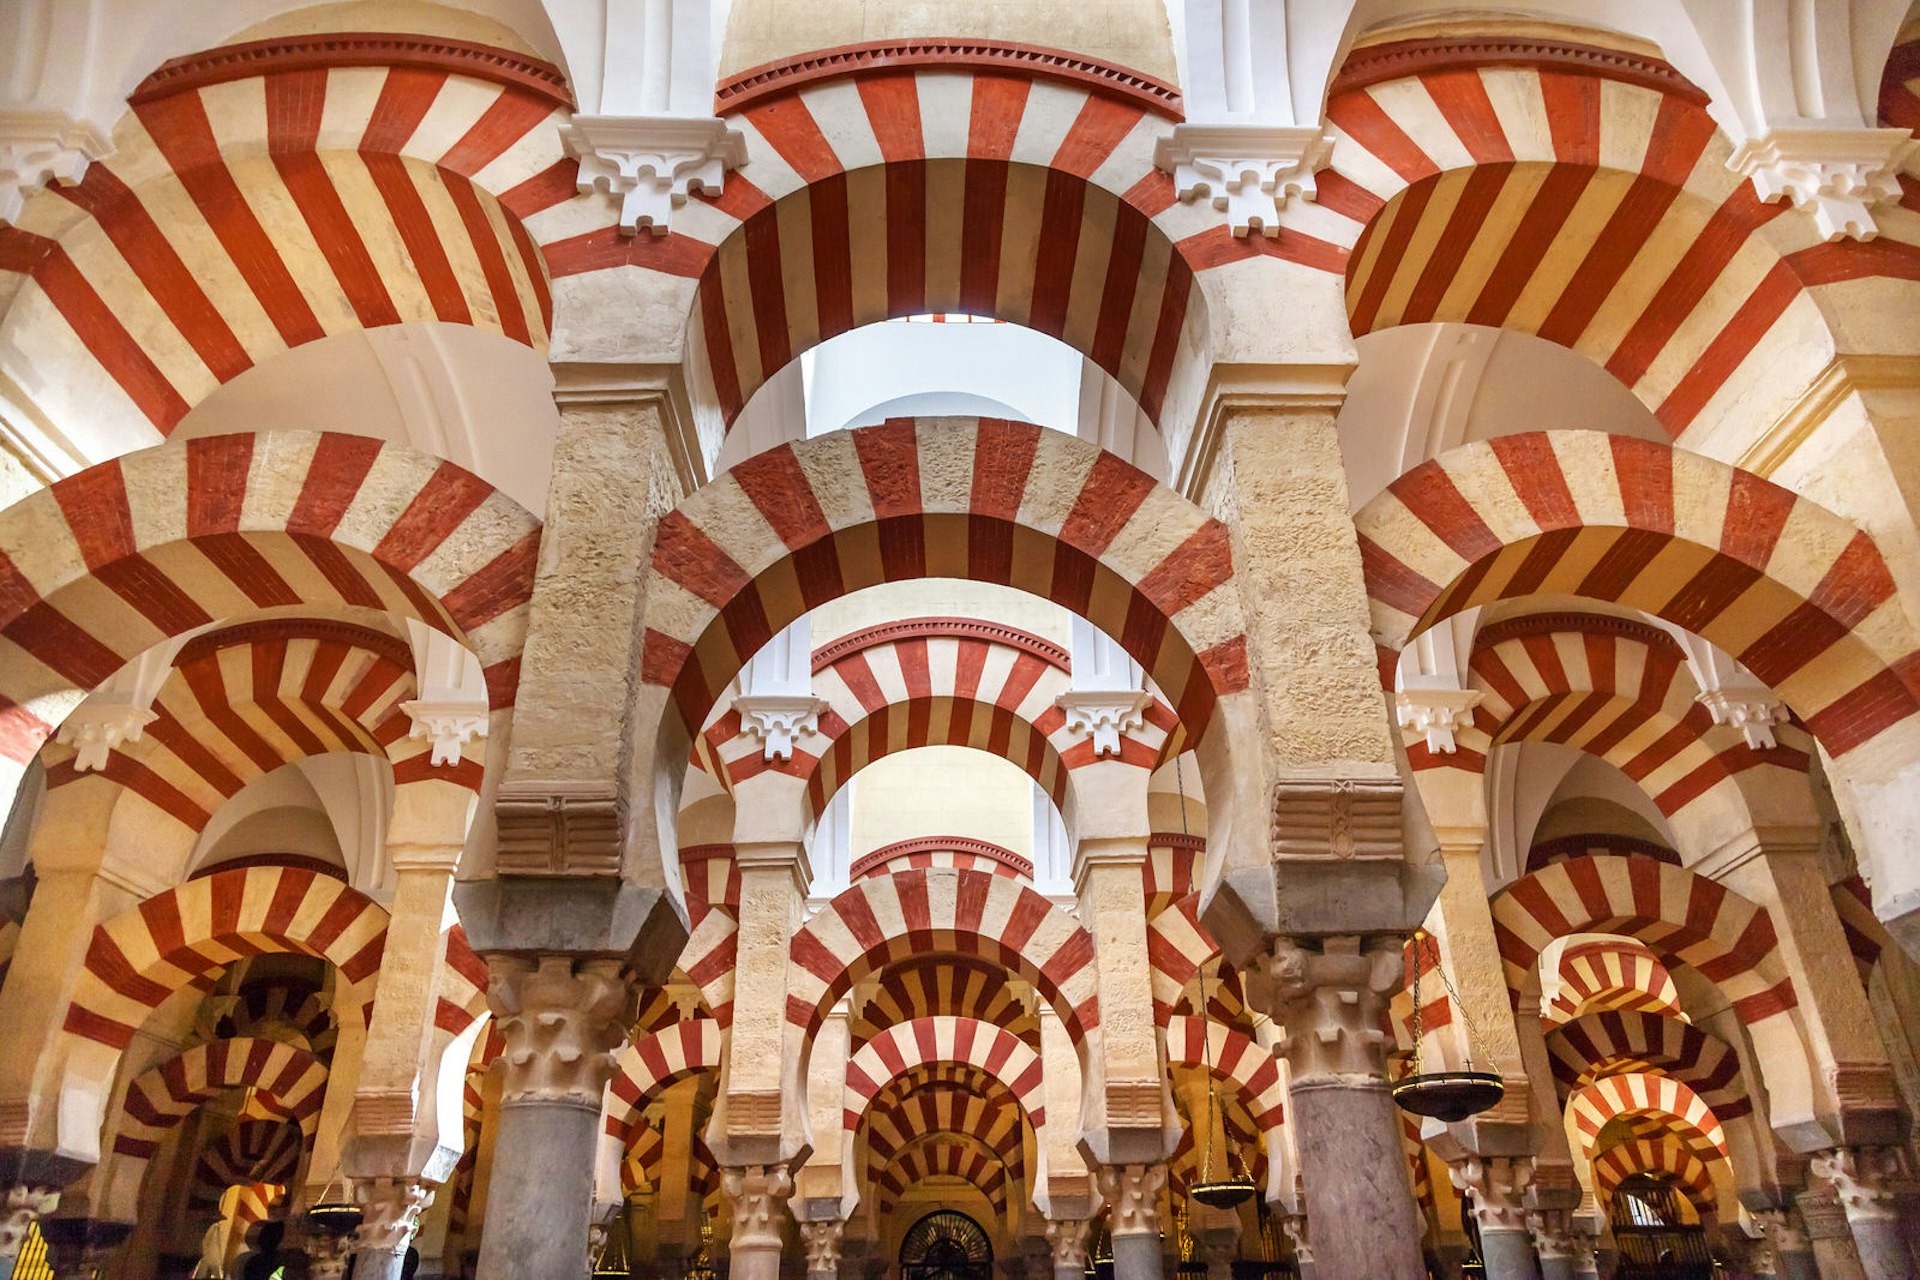 The interior of Cordoba's Mezquita, which resembles a mosque with rows of red and white striped arches.